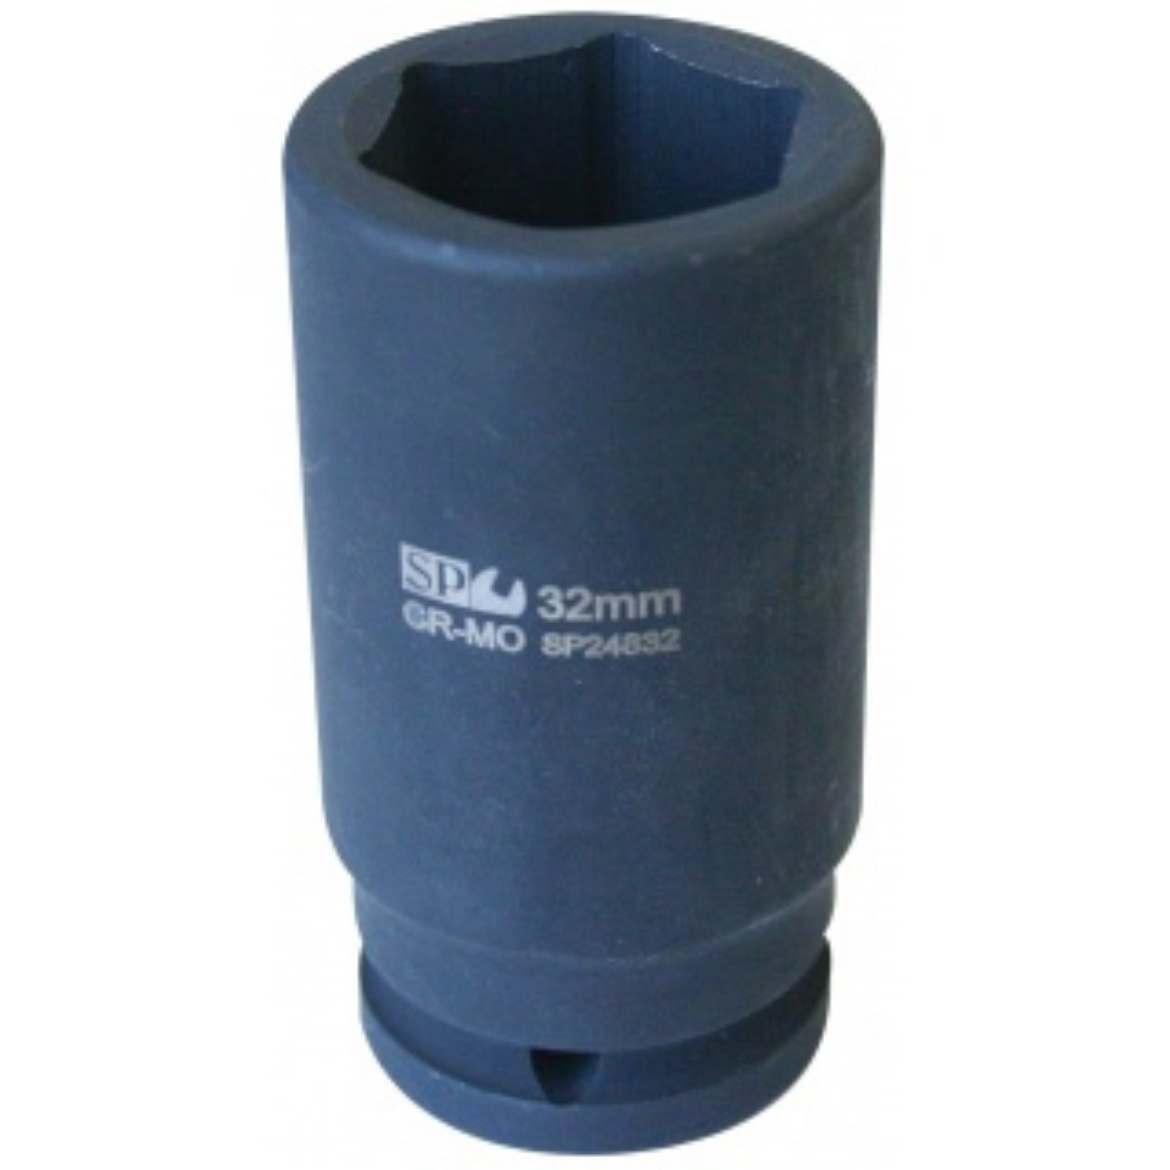 Picture of SOCKET IMPACT 3/4"DR 6PT DEEP METRIC 55MM SP TOOLS